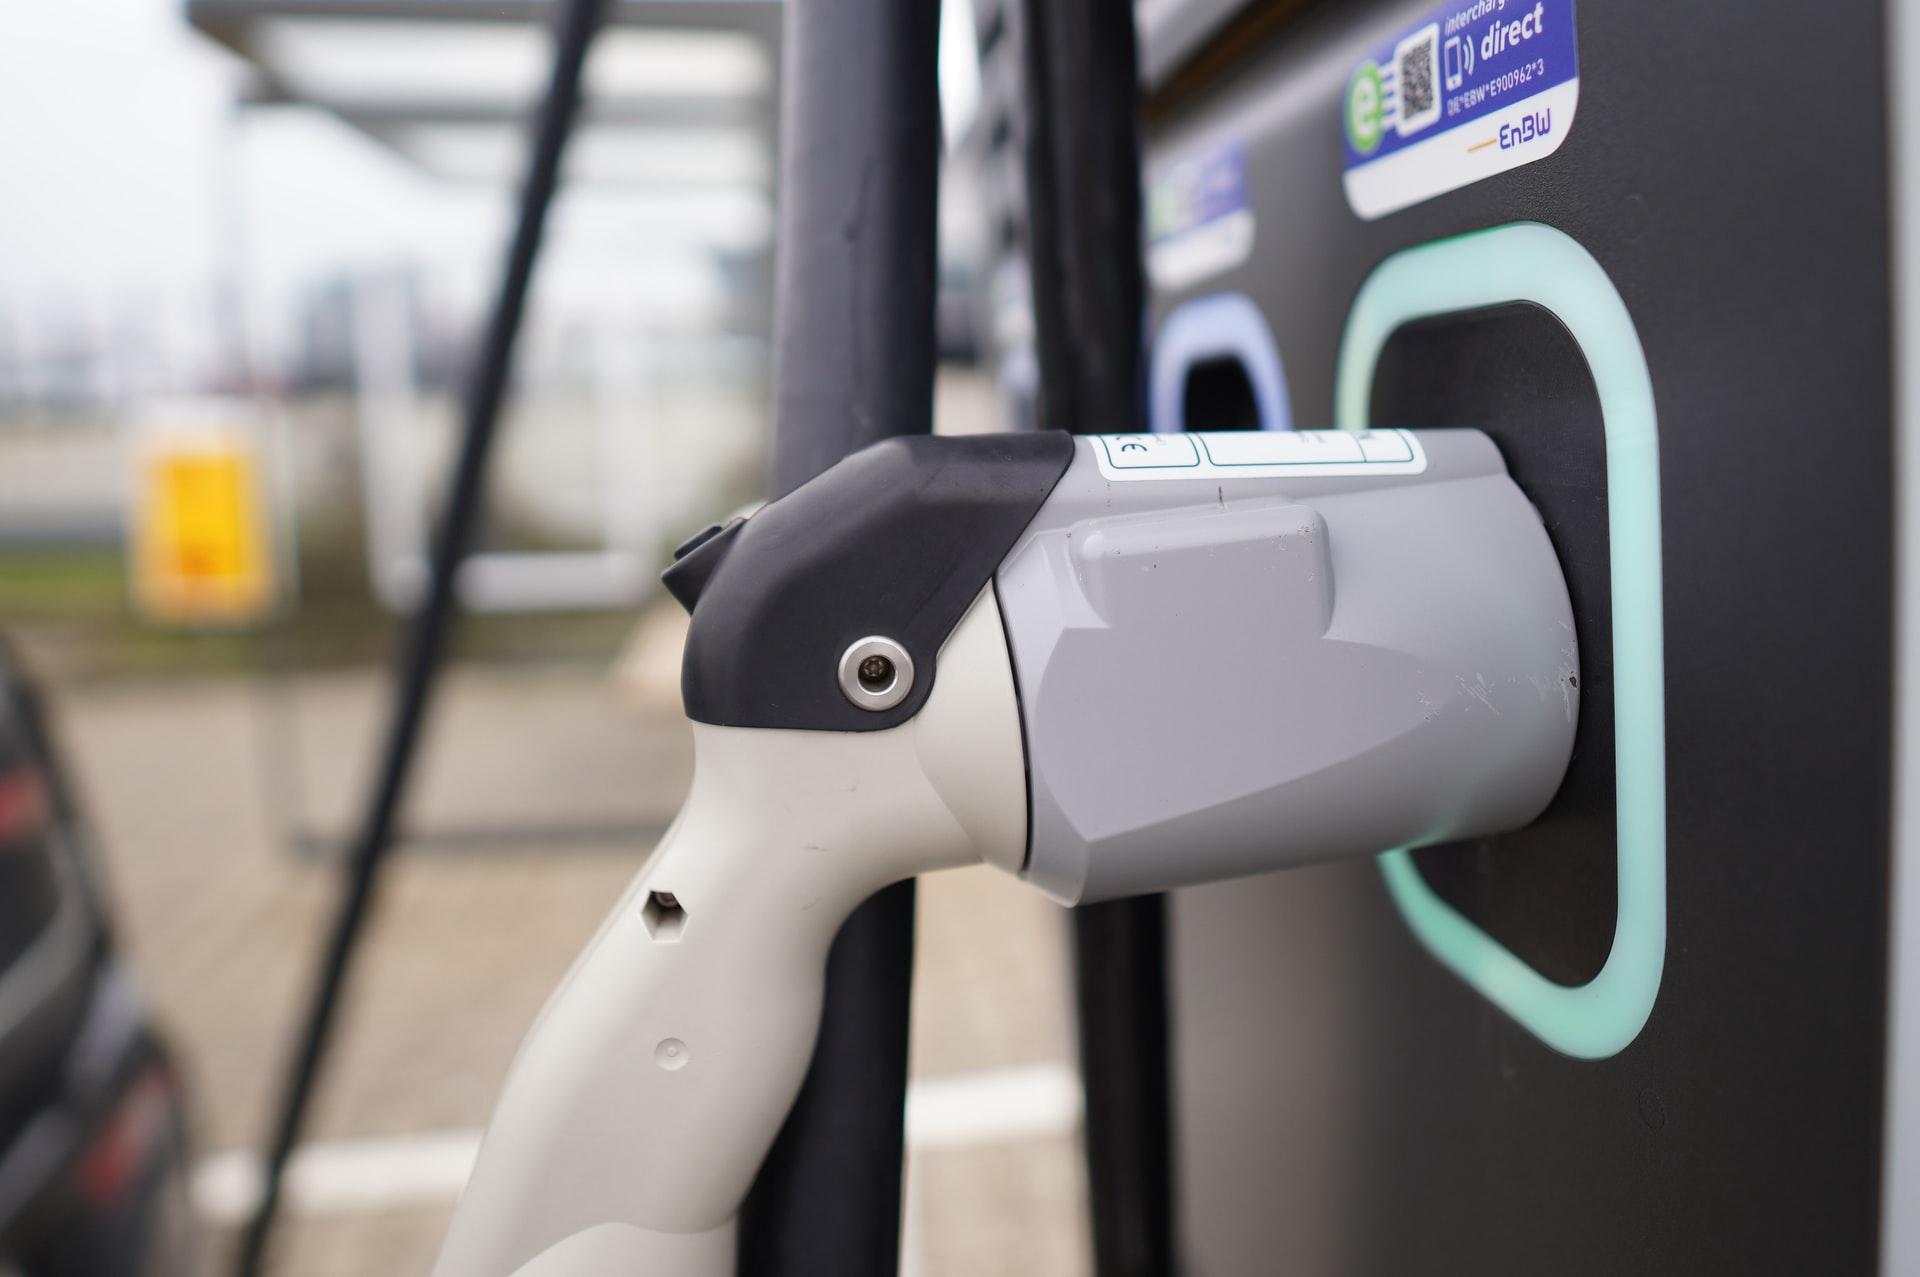 Improving charging infrastructure is a big step to increasing EV adoption.